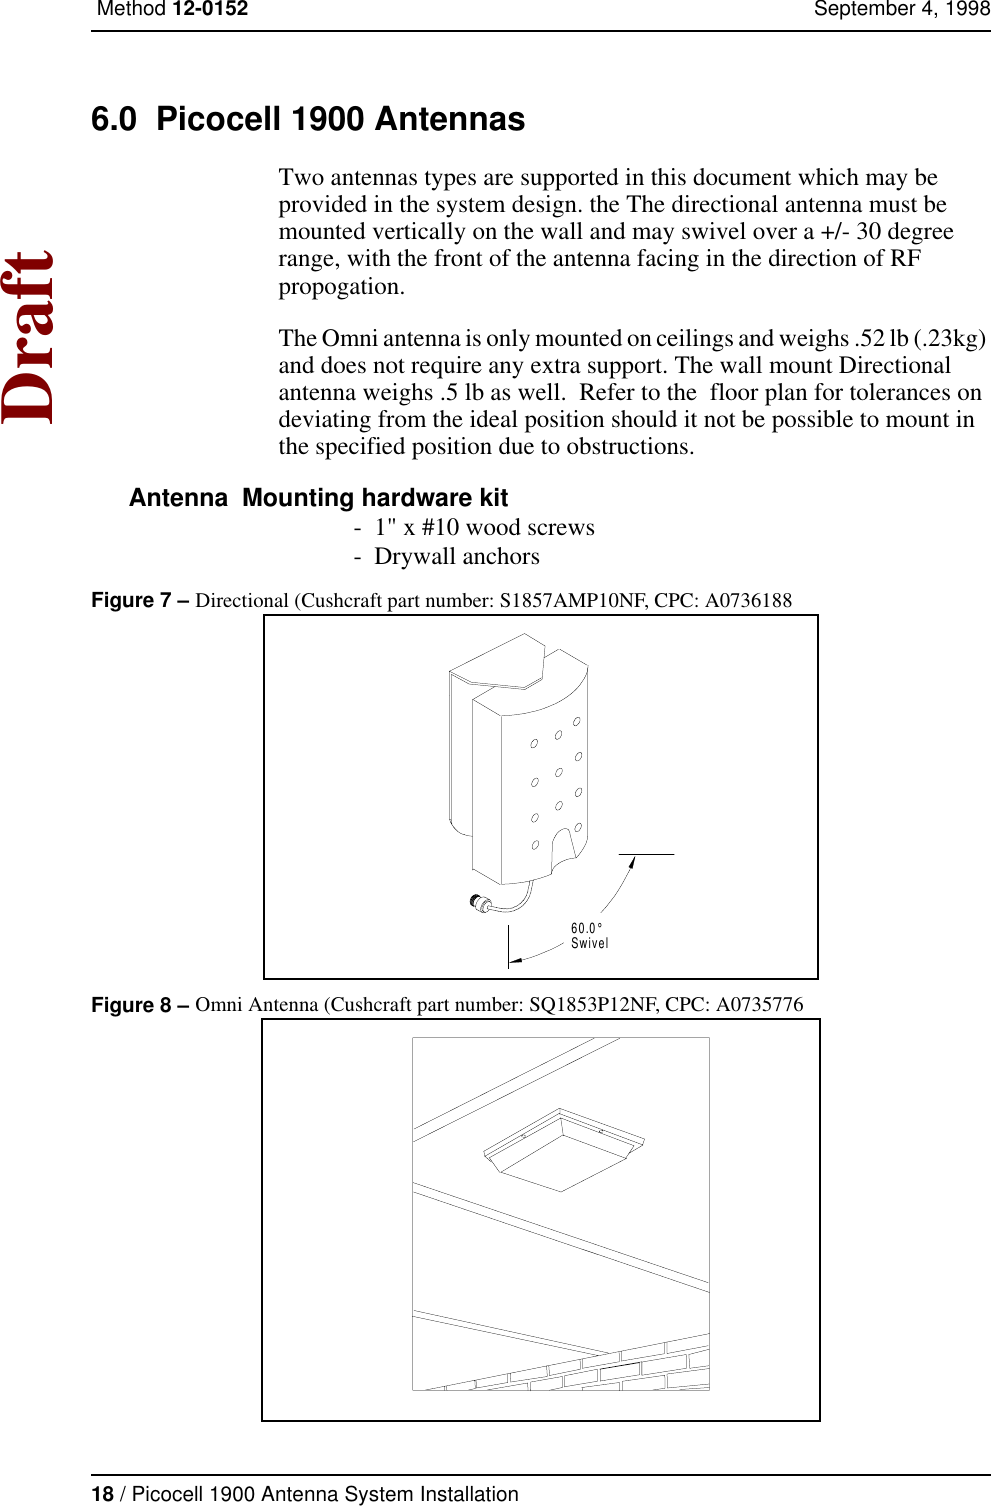 18 / Picocell 1900 Antenna System Installation Method 12-0152 September 4, 1998Draft6.0  Picocell 1900 AntennasTwo antennas types are supported in this document which may be provided in the system design. the The directional antenna must be mounted vertically on the wall and may swivel over a +/- 30 degree range, with the front of the antenna facing in the direction of RF propogation. The Omni antenna is only mounted on ceilings and weighs .52 lb (.23kg) and does not require any extra support. The wall mount Directional antenna weighs .5 lb as well.  Refer to the  floor plan for tolerances on deviating from the ideal position should it not be possible to mount in the specified position due to obstructions. Antenna  Mounting hardware kit -  1&quot; x #10 wood screws -  Drywall anchorsFigure 7 – Directional (Cushcraft part number: S1857AMP10NF, CPC: A0736188Figure 8 – Omni Antenna (Cushcraft part number: SQ1853P12NF, CPC: A0735776 60.0°Swivel